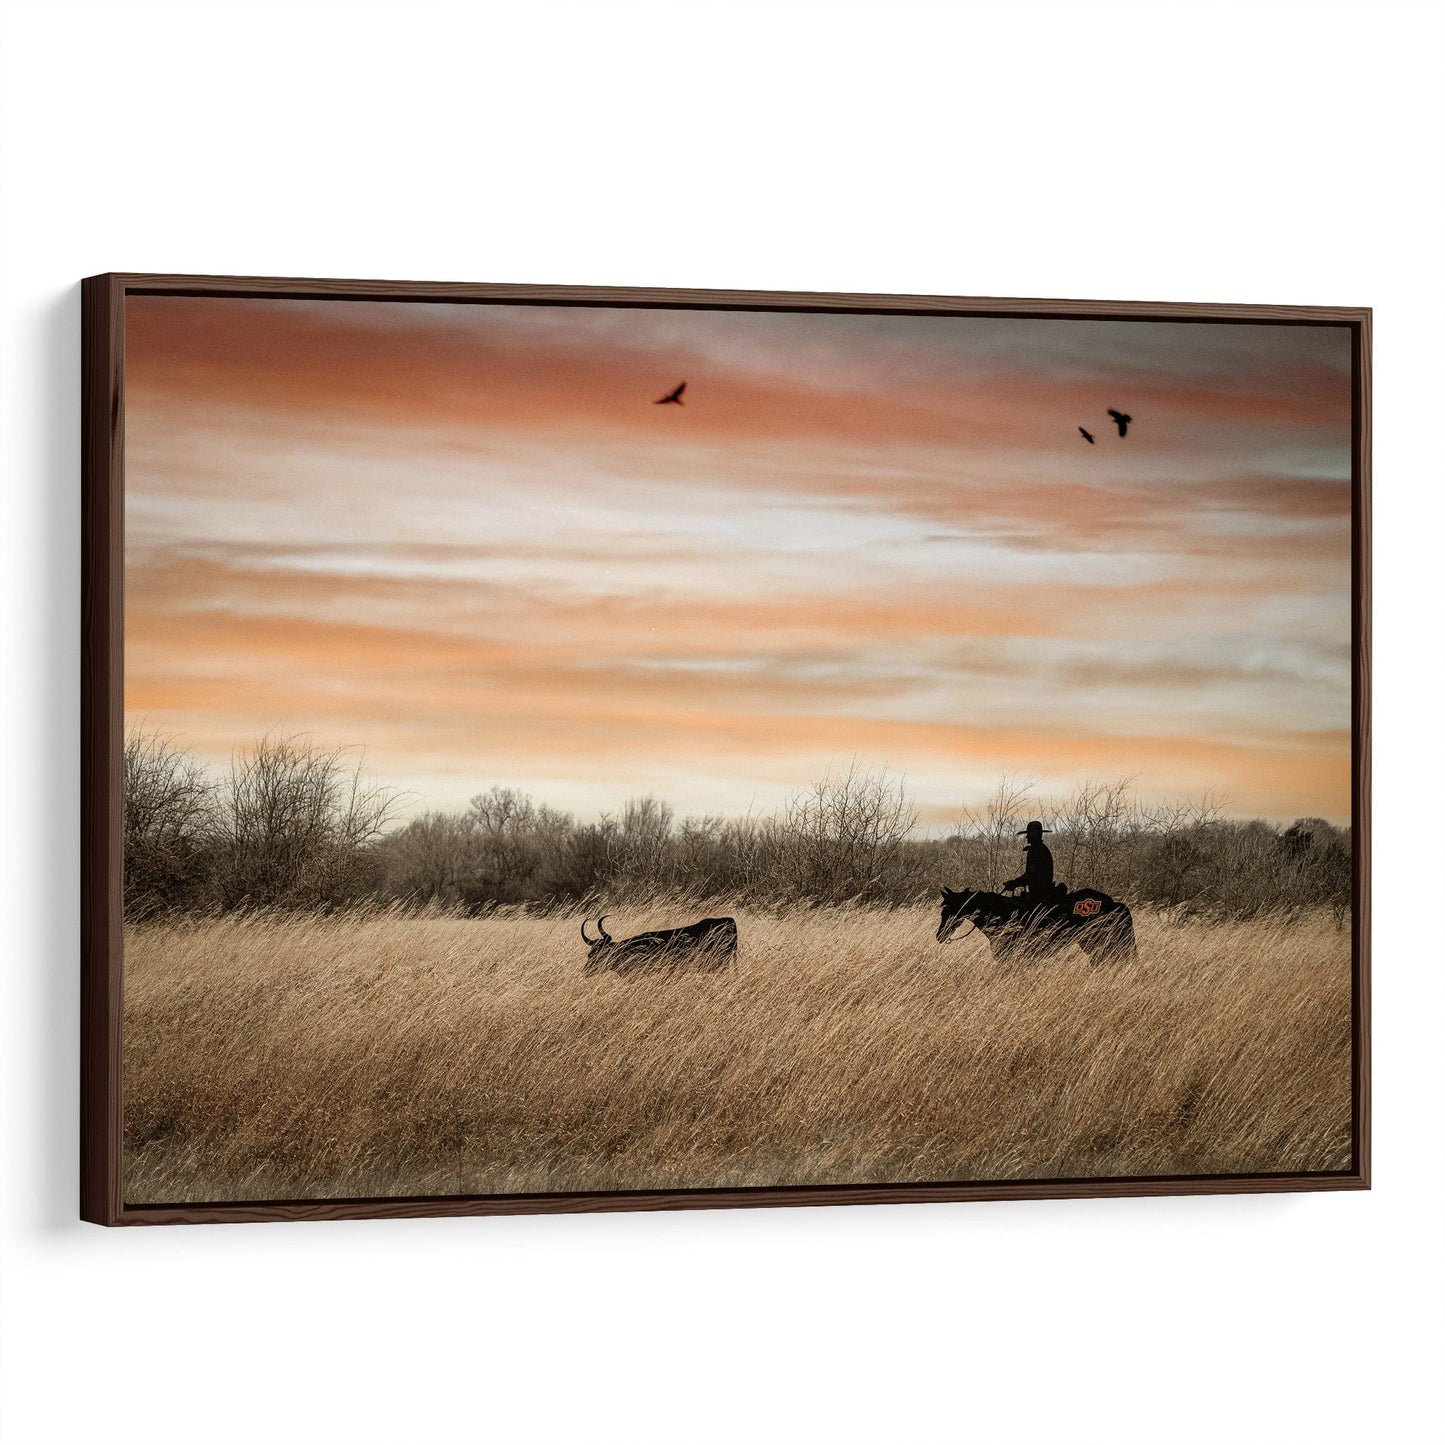 Oklahoma State University Wall Art - Cowboy, Horse and Longhorn Canvas-Walnut Frame / 12 x 18 Inches Wall Art Teri James Photography